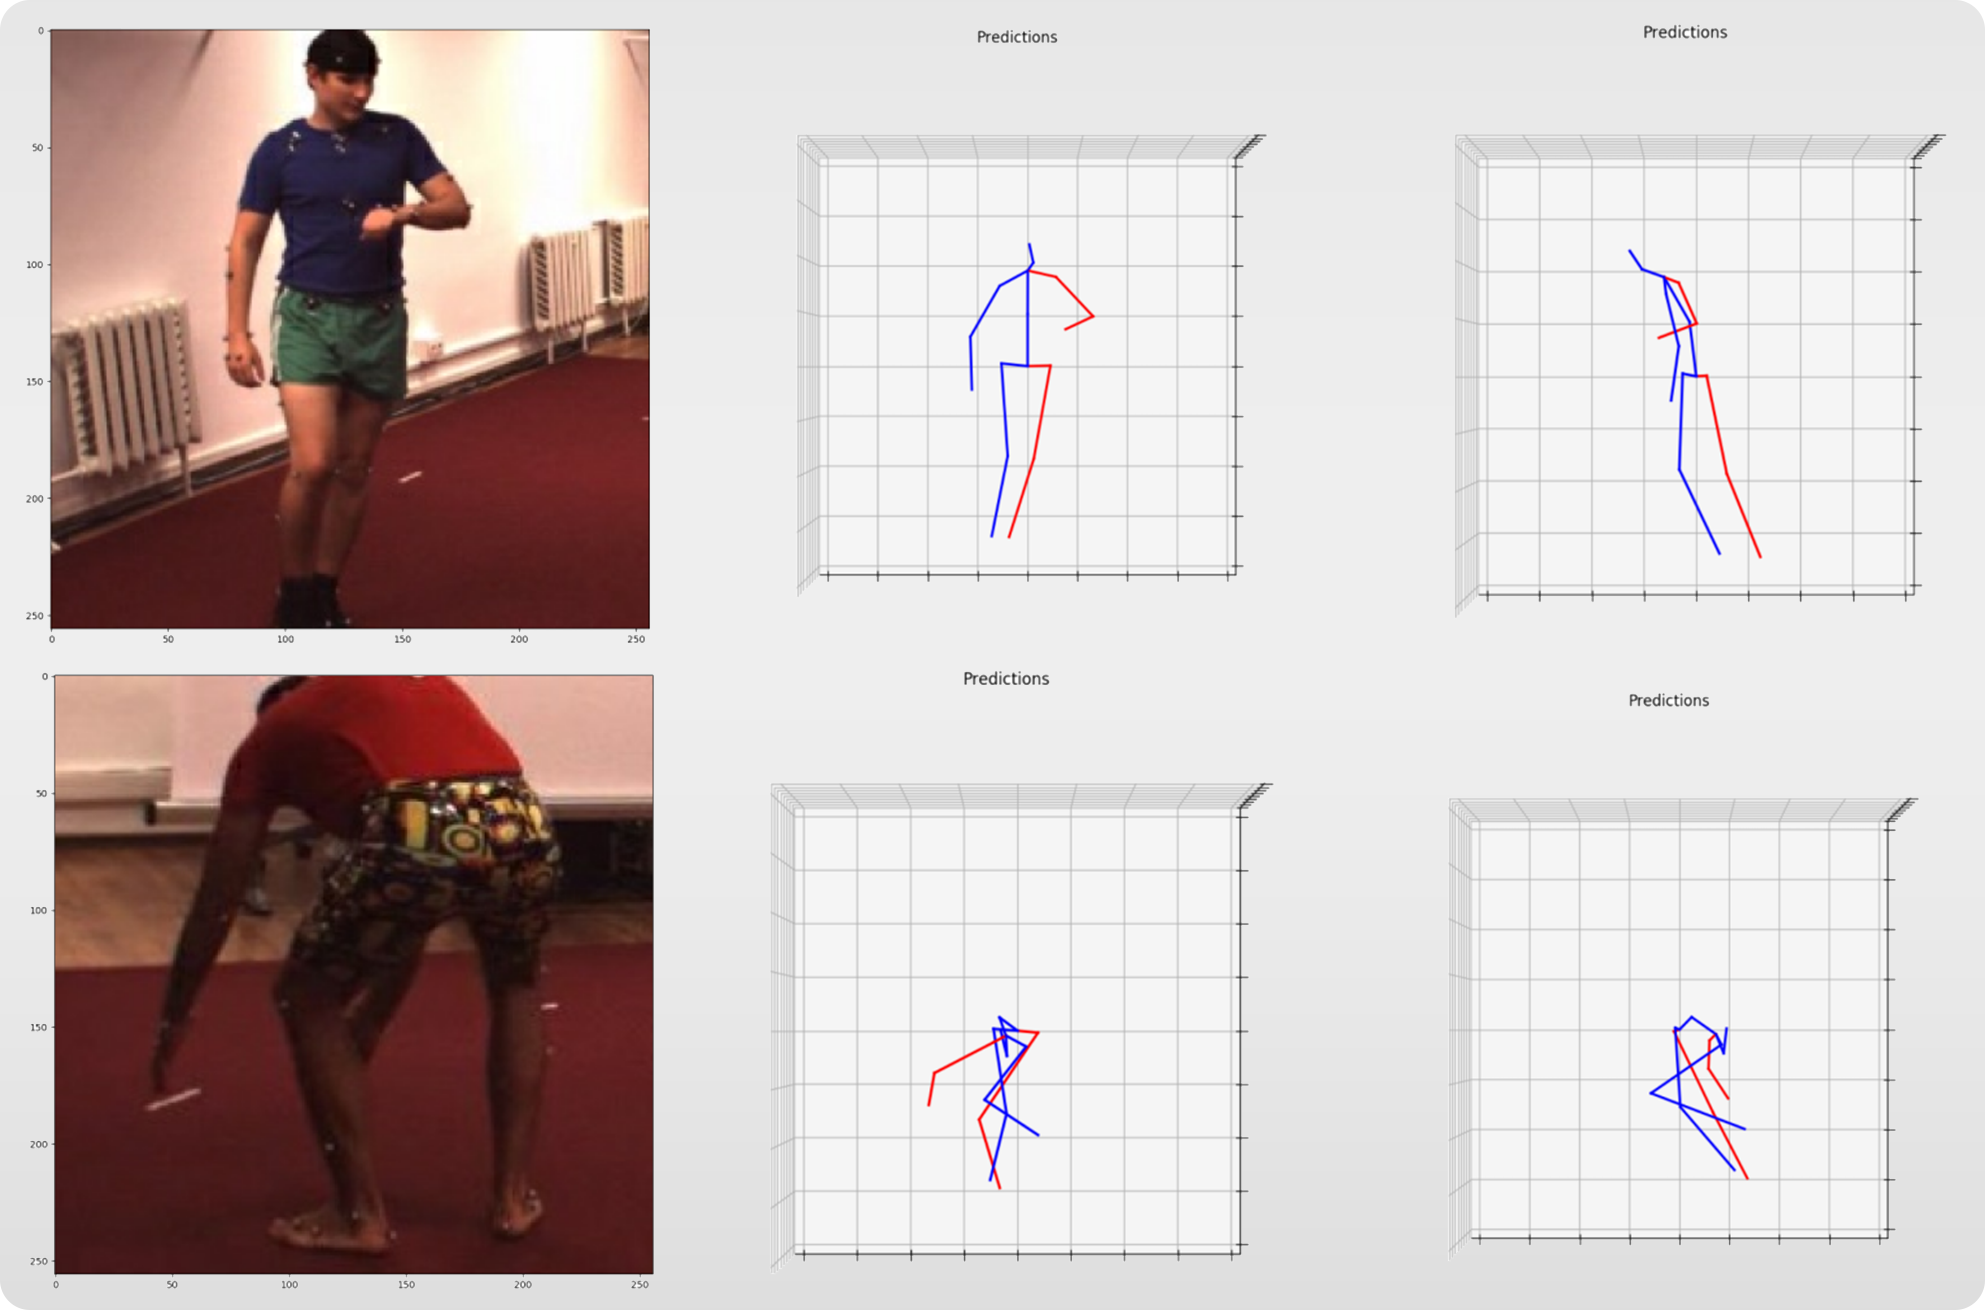 3D Human Pose Estimation of a Partial Body (camera ready)